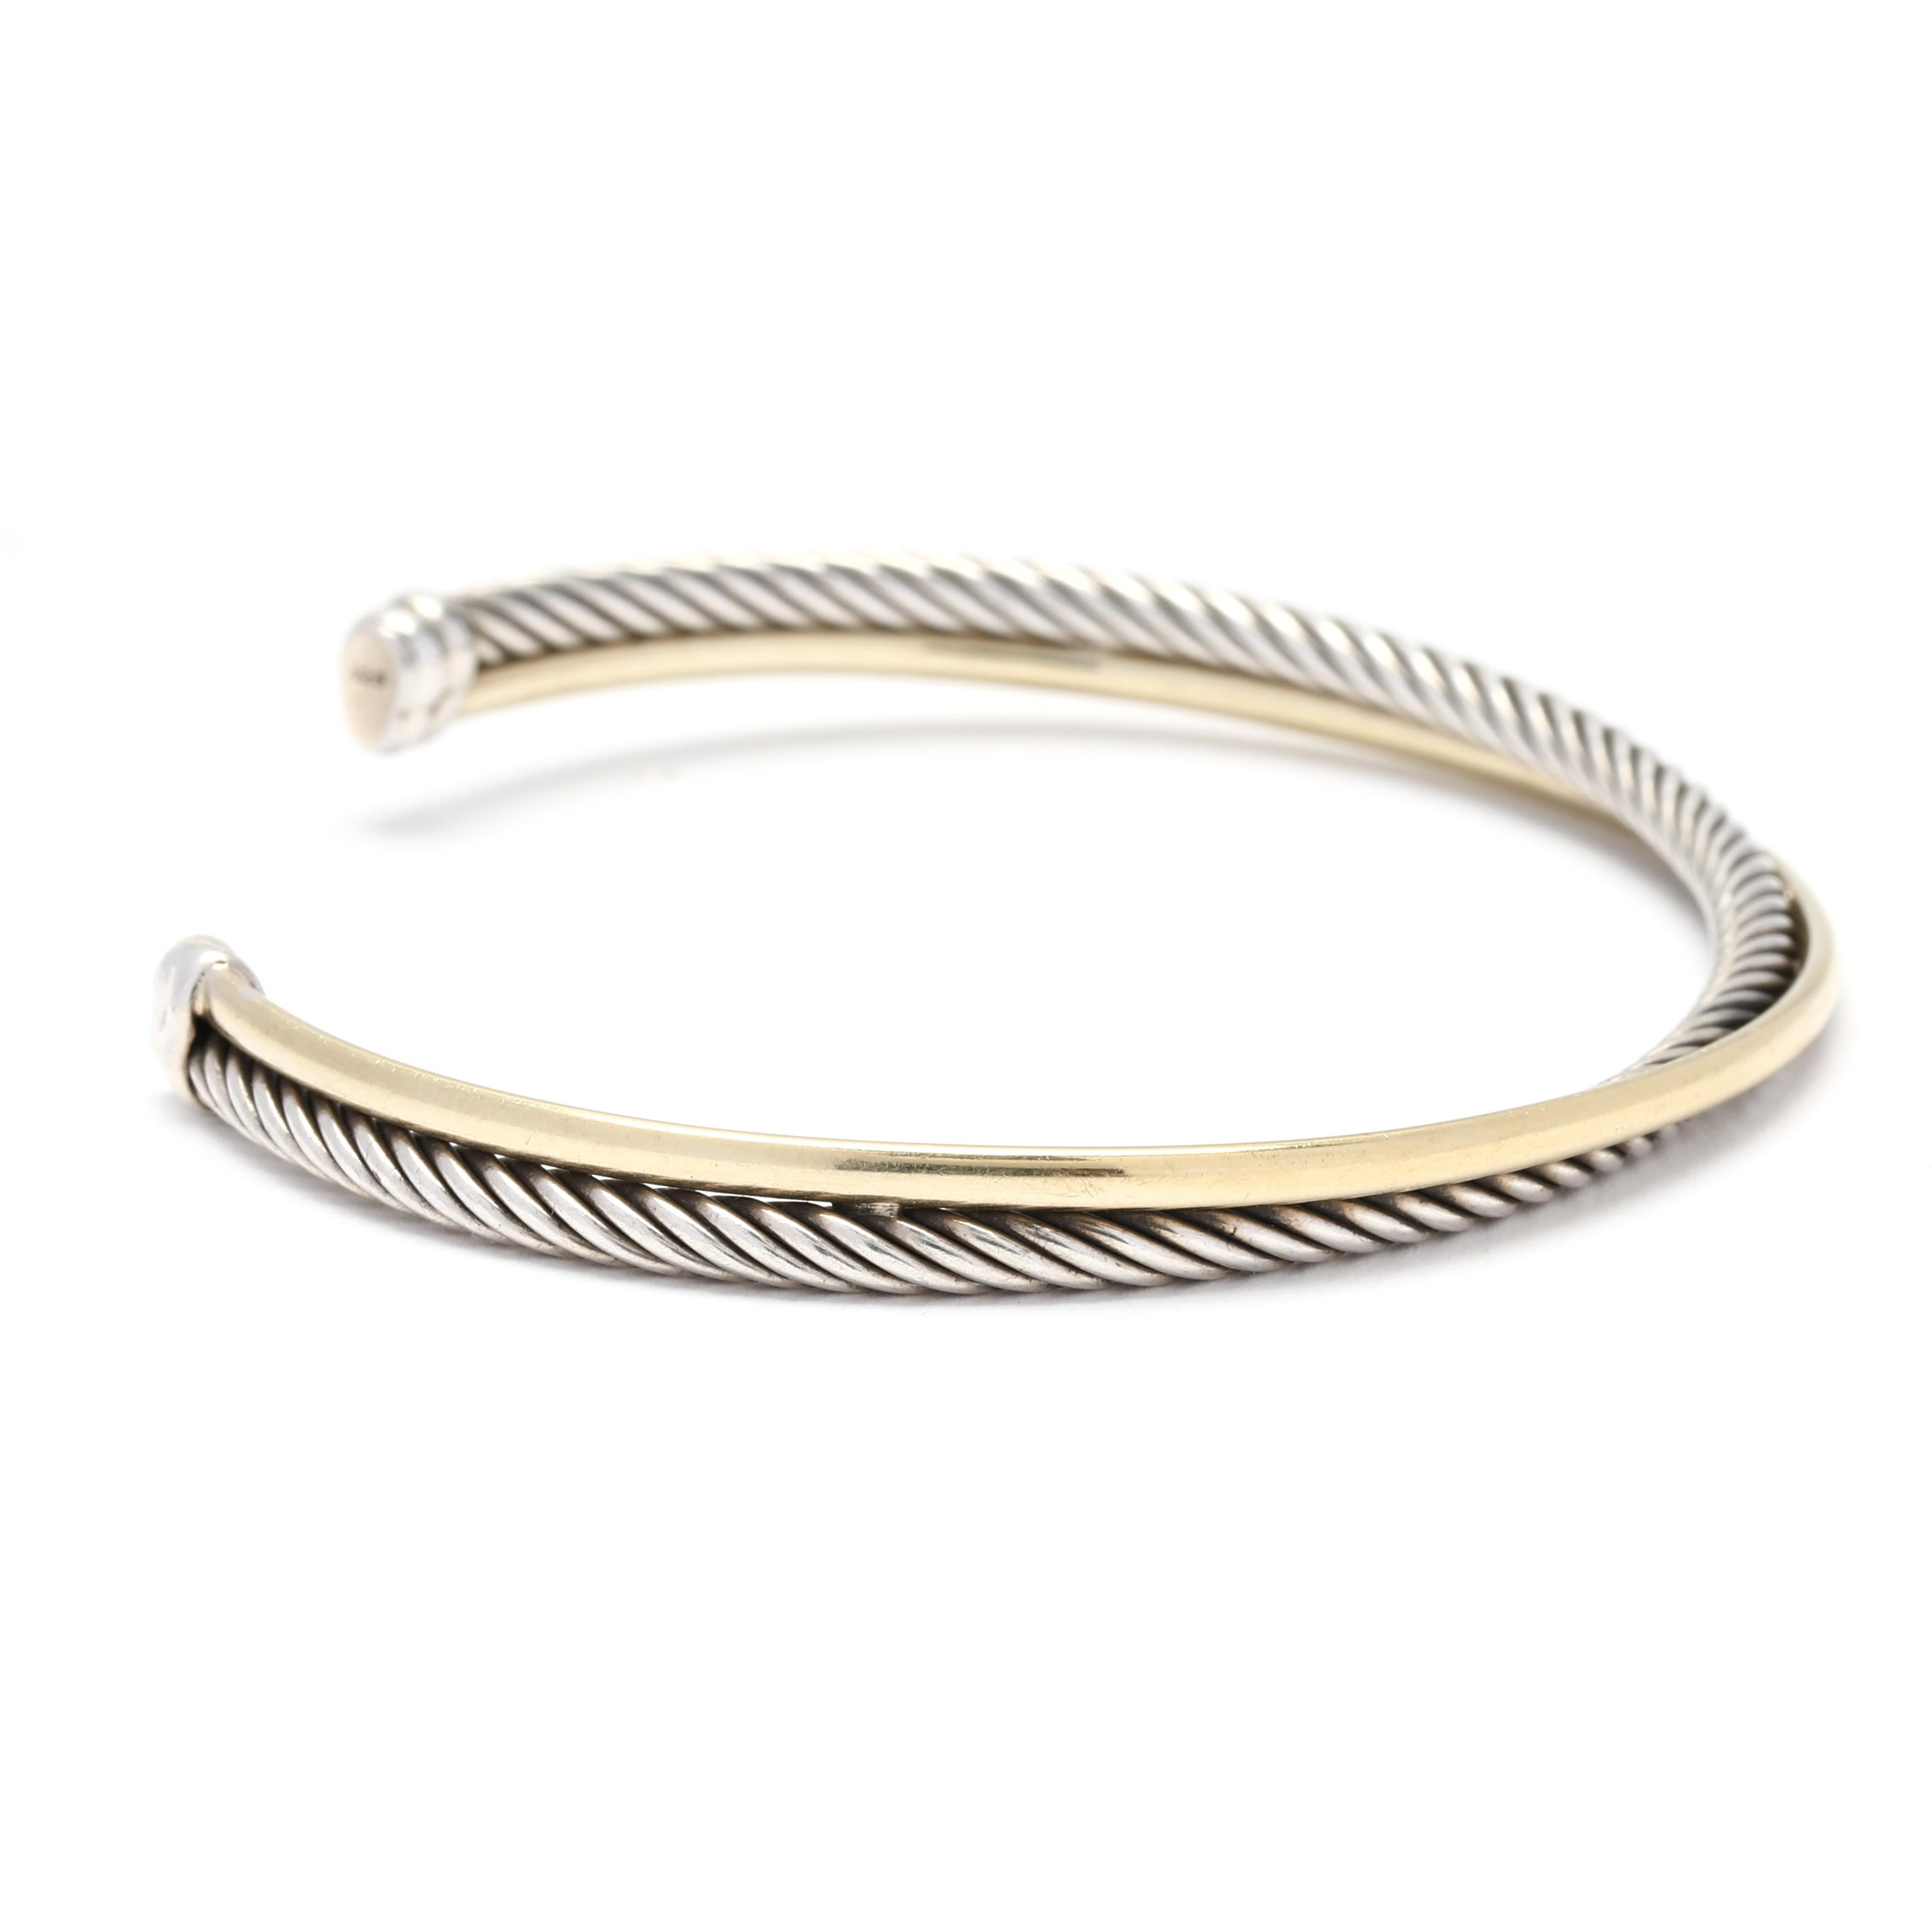 The David Yurman Crossover Cuff Bracelet is a stunning piece of jewelry that combines the warmth of 18K yellow gold with the sleekness of sterling silver. This bracelet features a crossover design, with one side crafted from 18K yellow gold and the